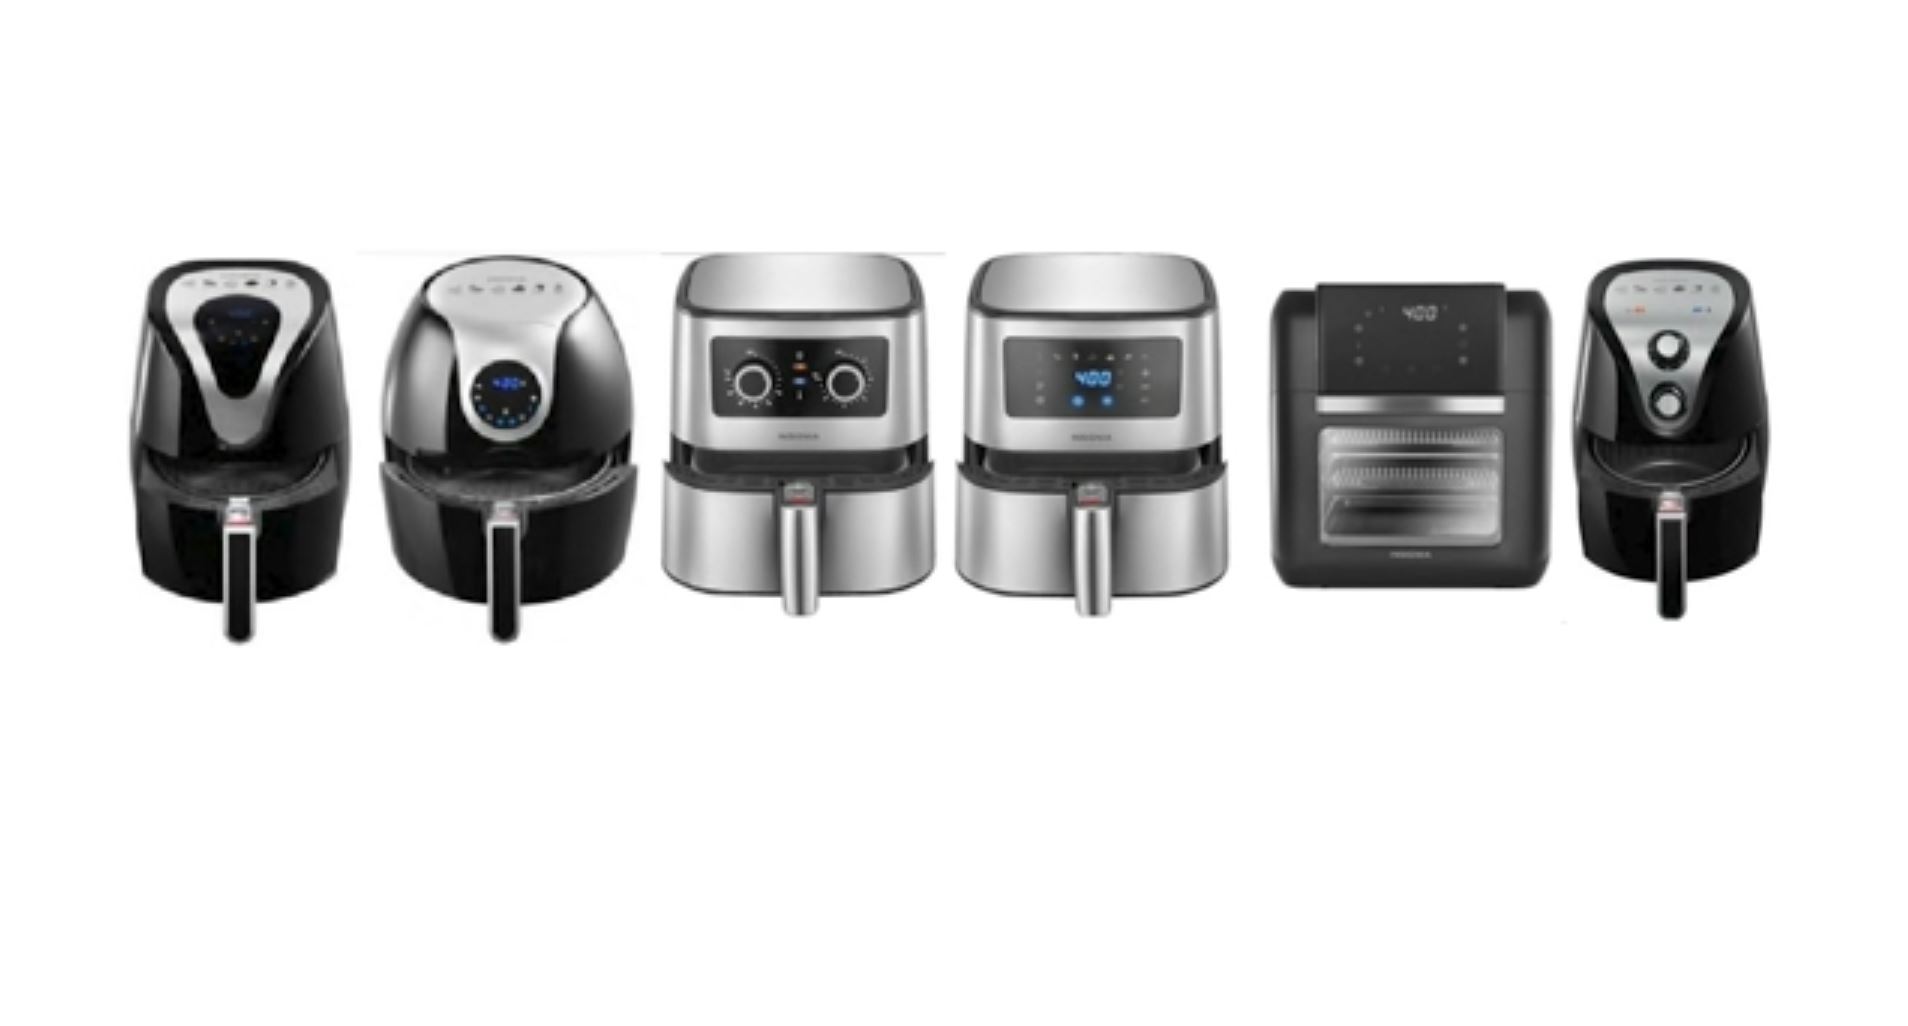 having trouble choosing which Air Fryer i should purchase 😅 : r/airfryer